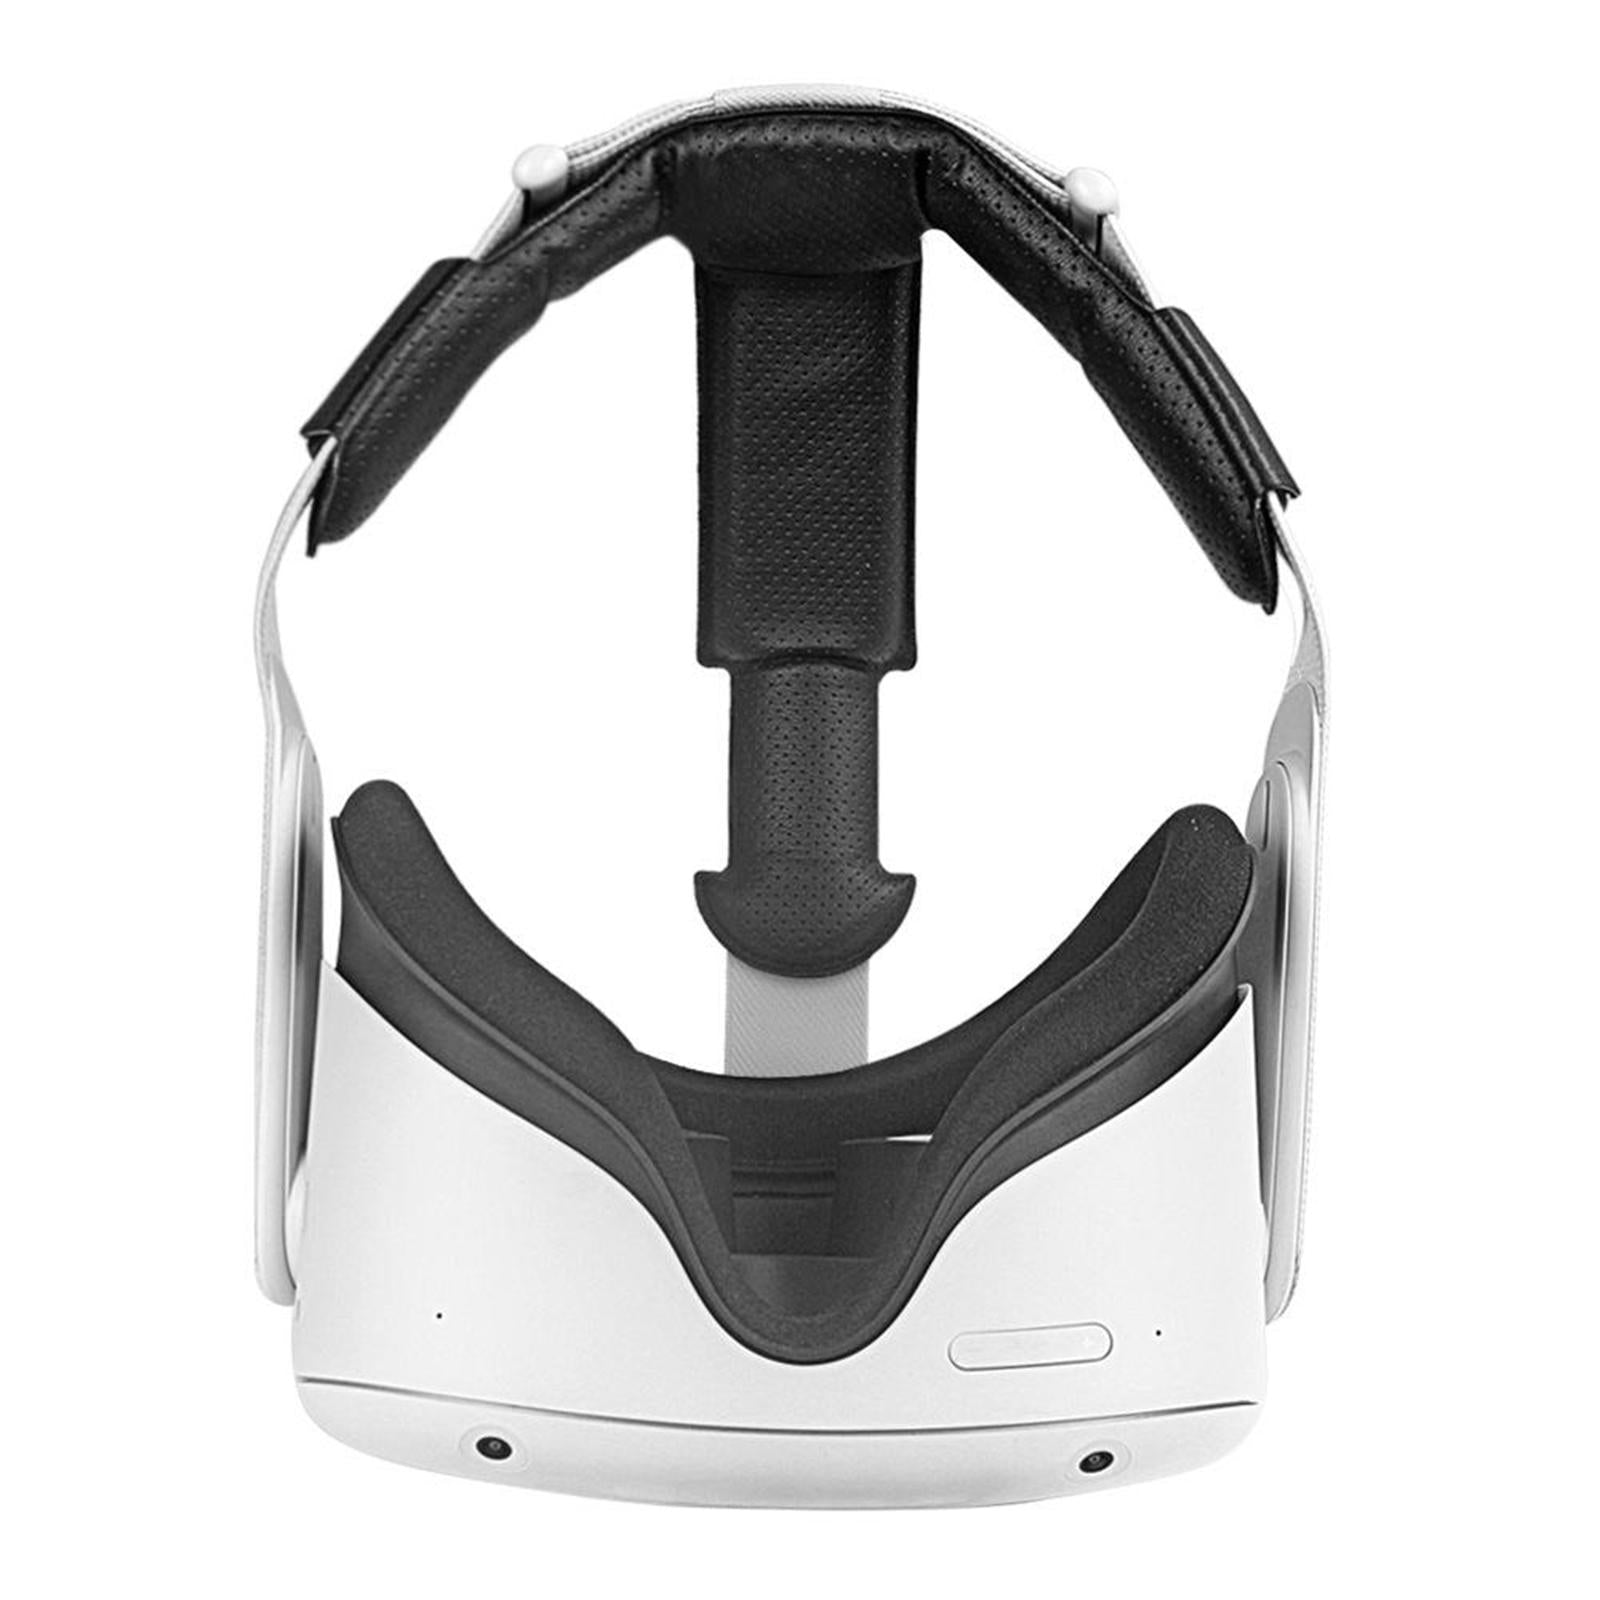 PU Leather Head Strap Pad Adjustable for Oculus Quest 2 Quick Cleaning Beige